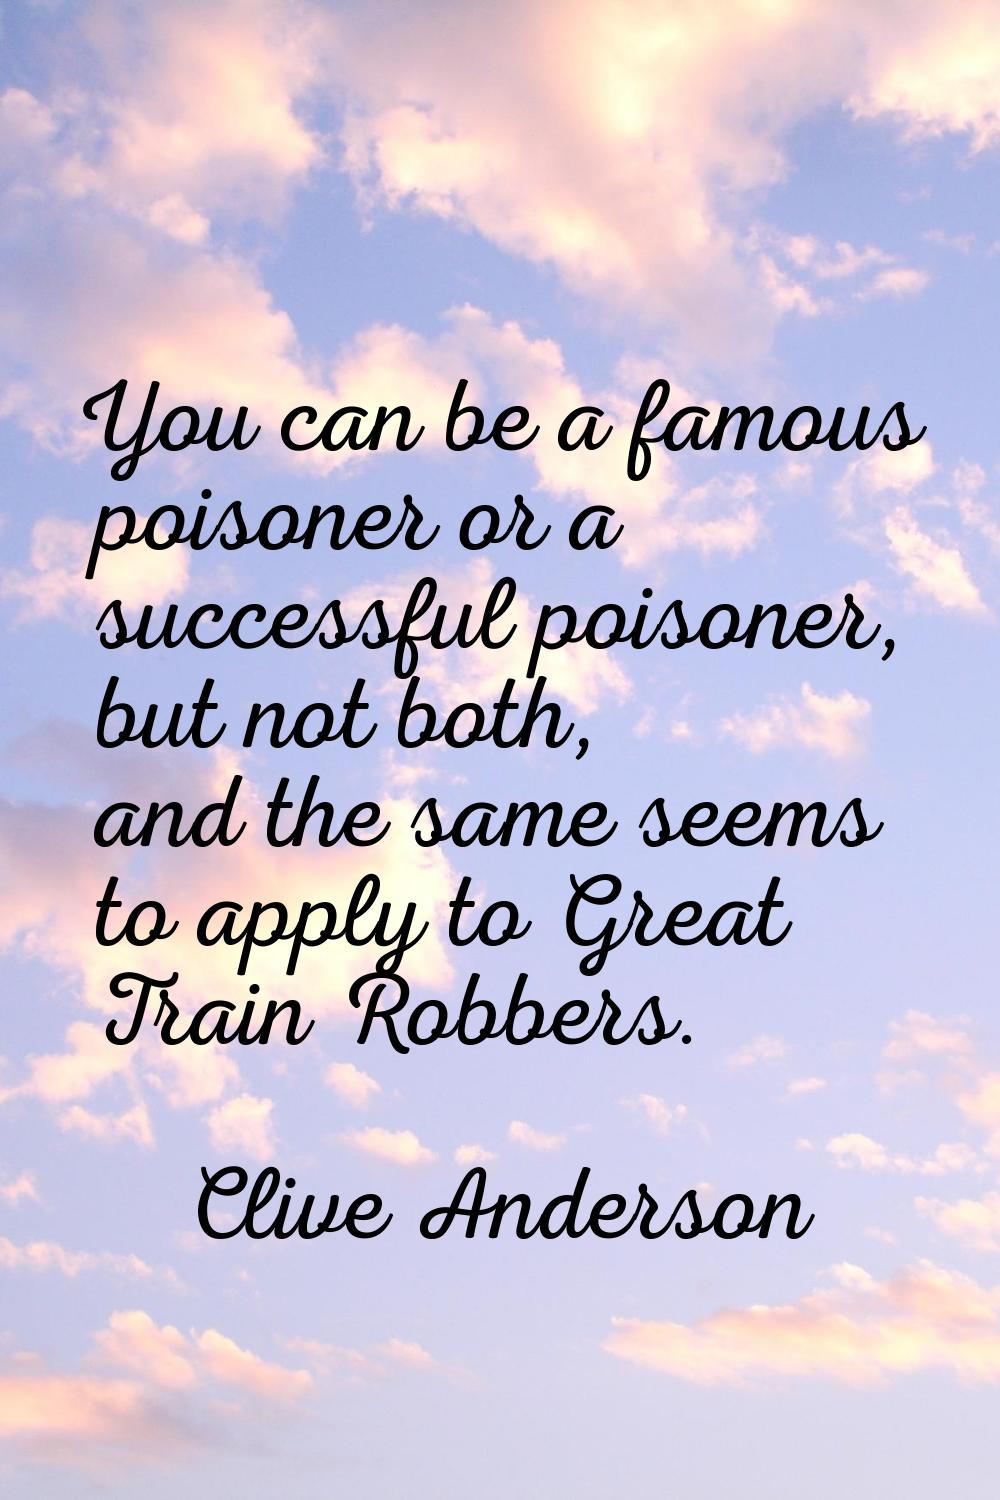 You can be a famous poisoner or a successful poisoner, but not both, and the same seems to apply to